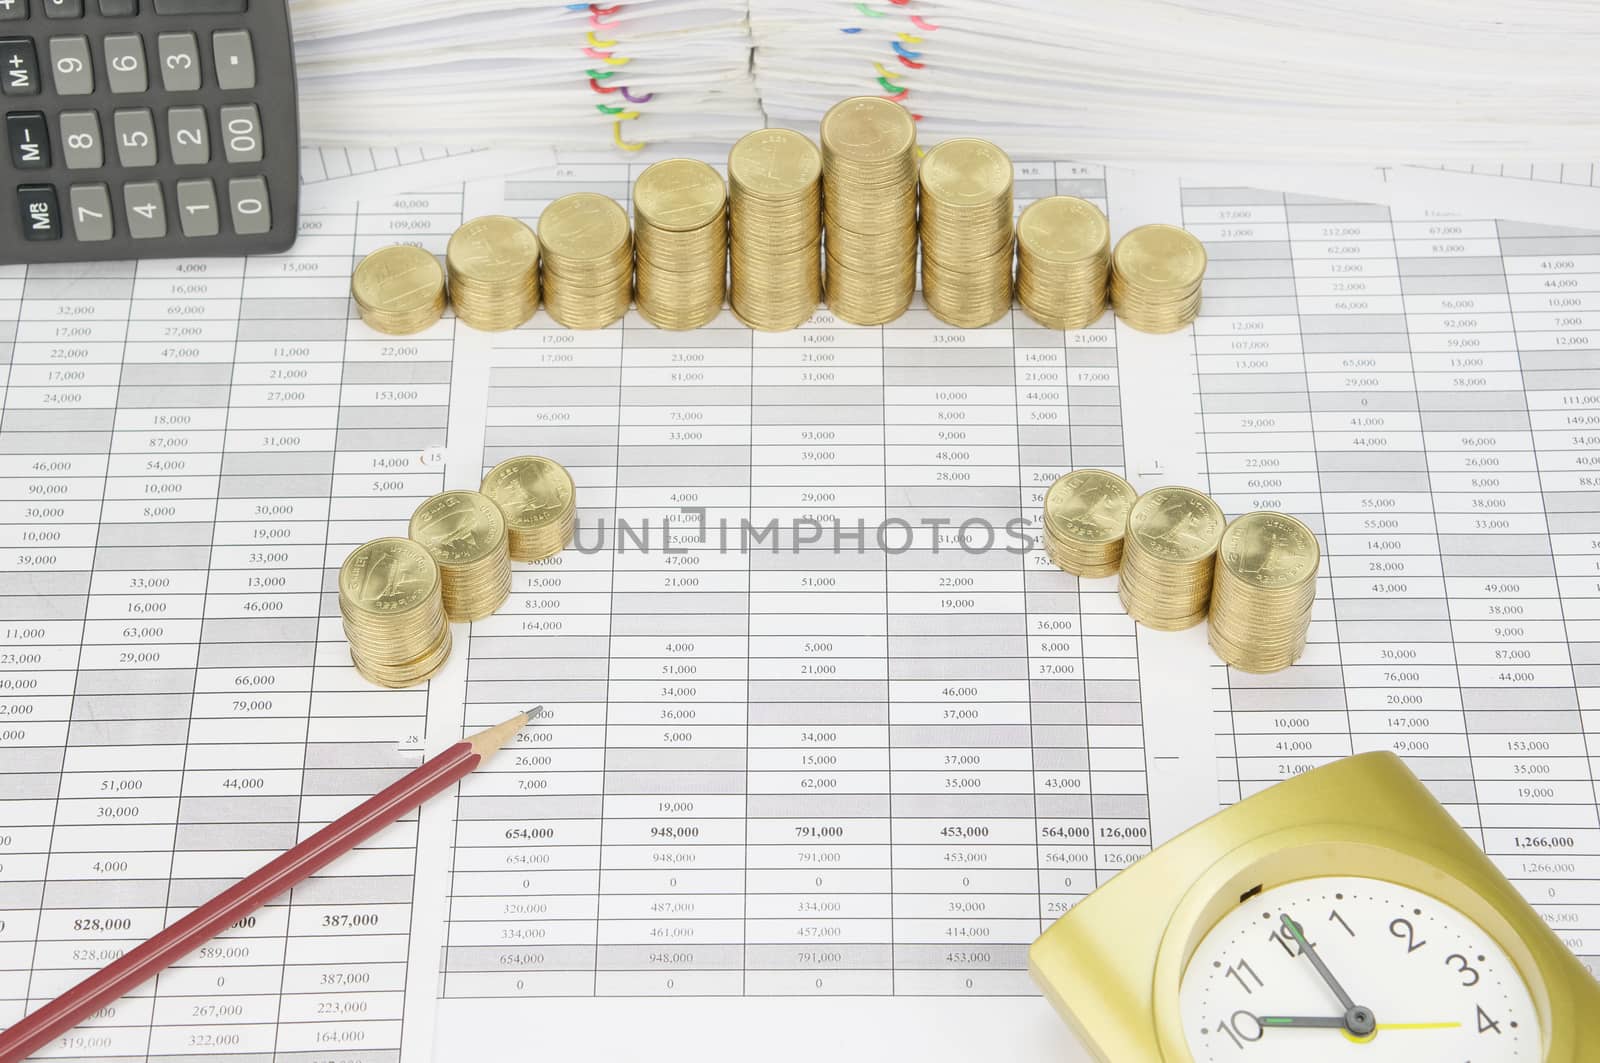 Pencil with clock have step of gold coins as background by eaglesky